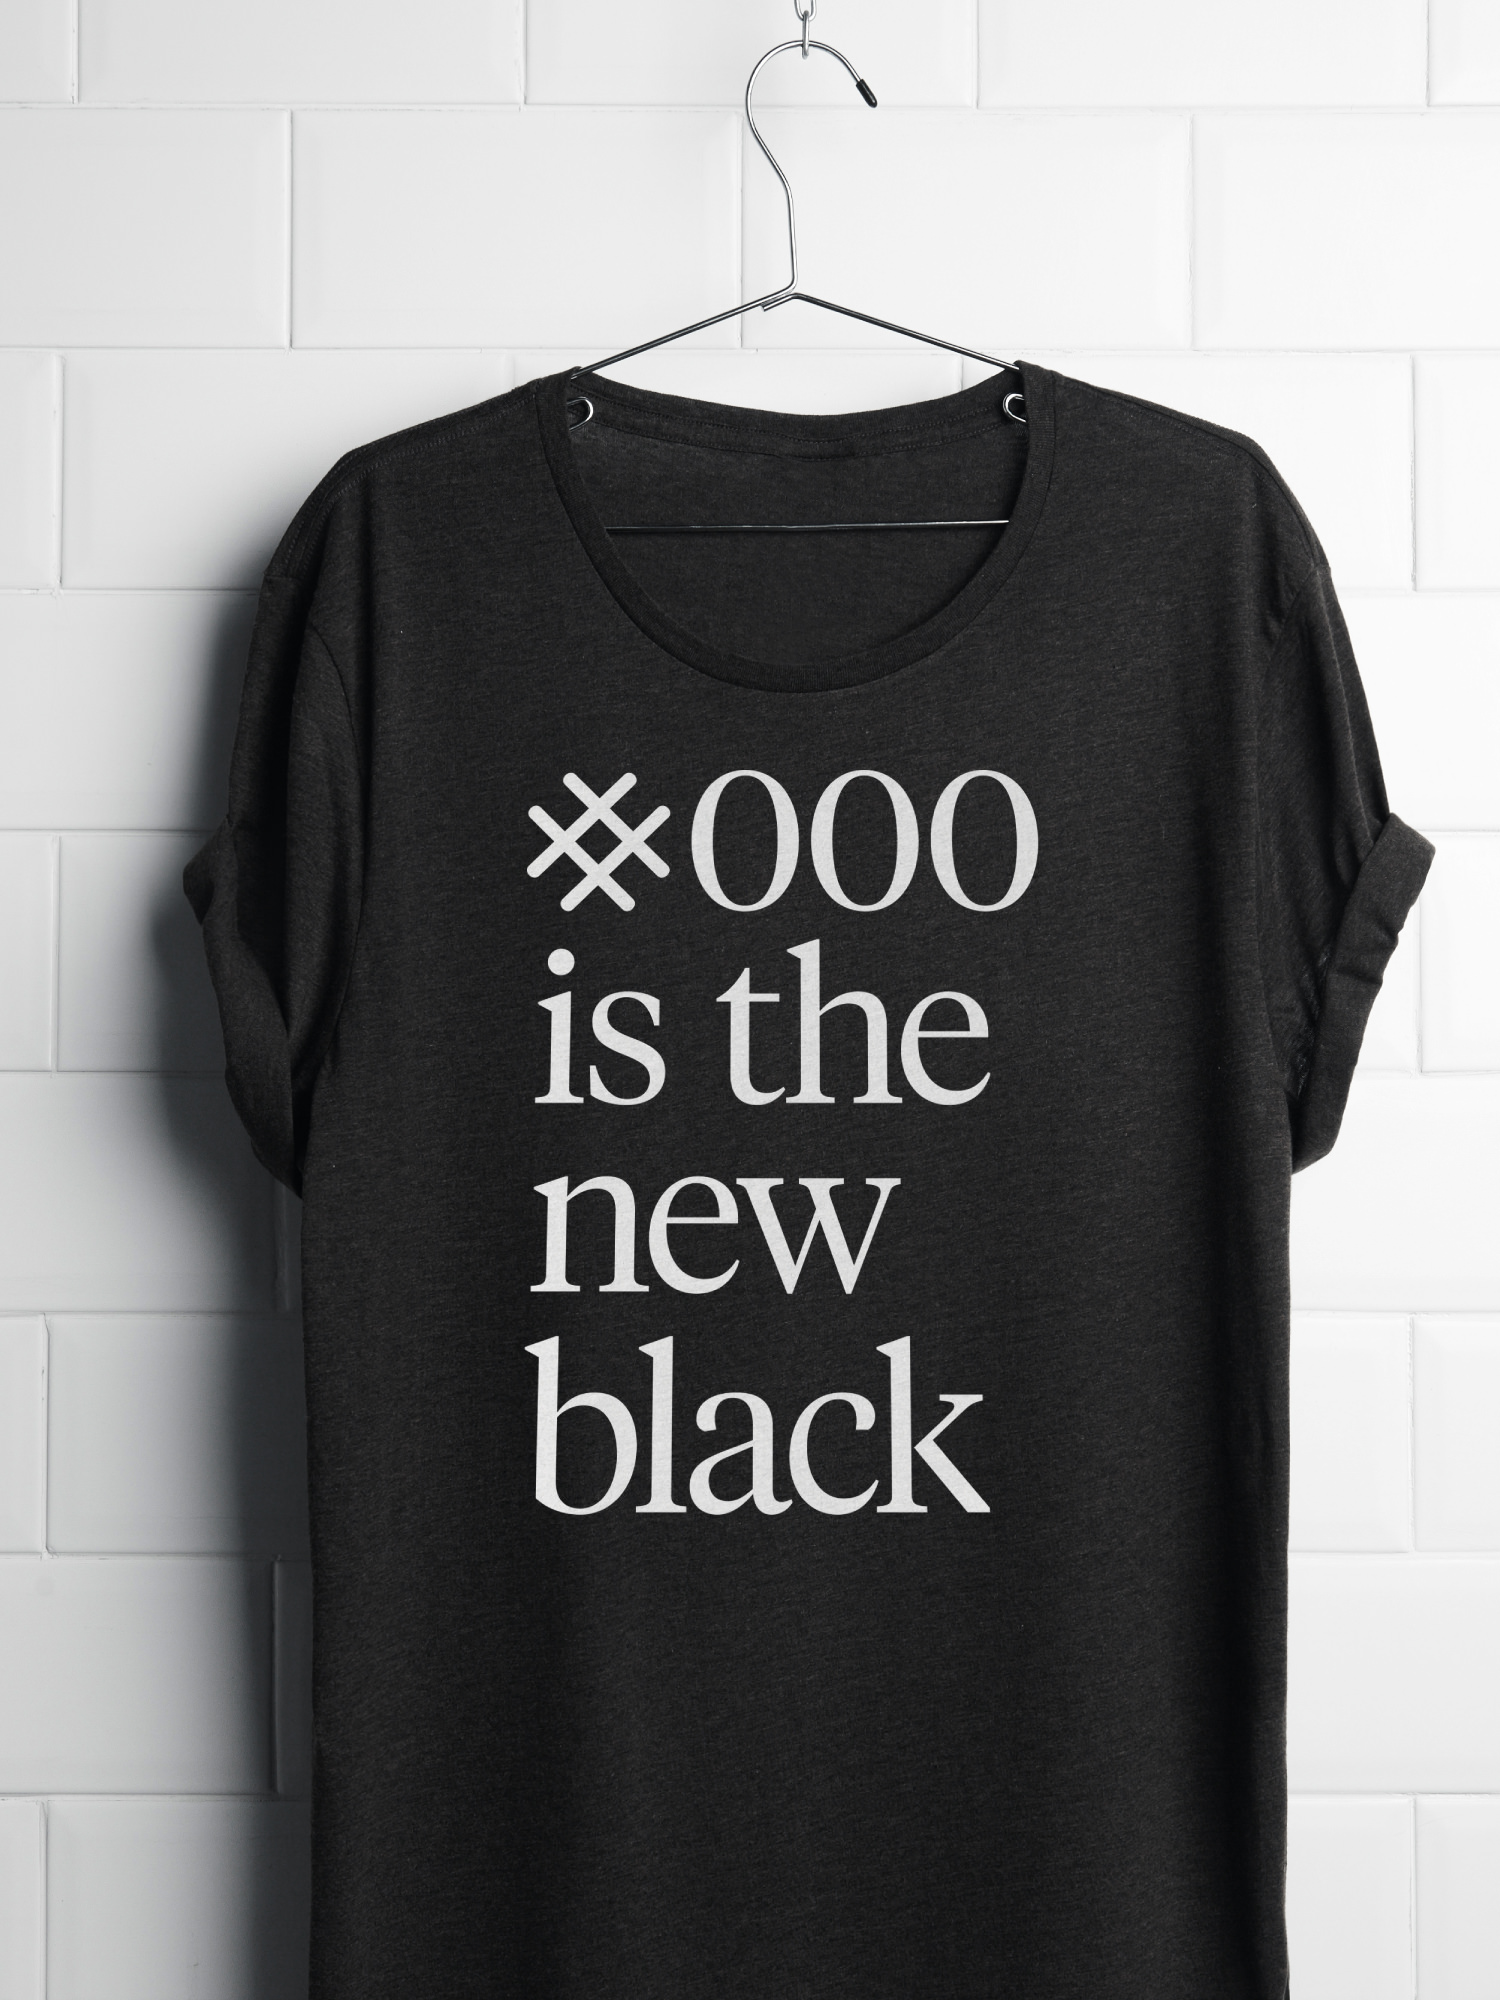 Black t-shirt with printed text referencing CSS for Ladies Learning Code